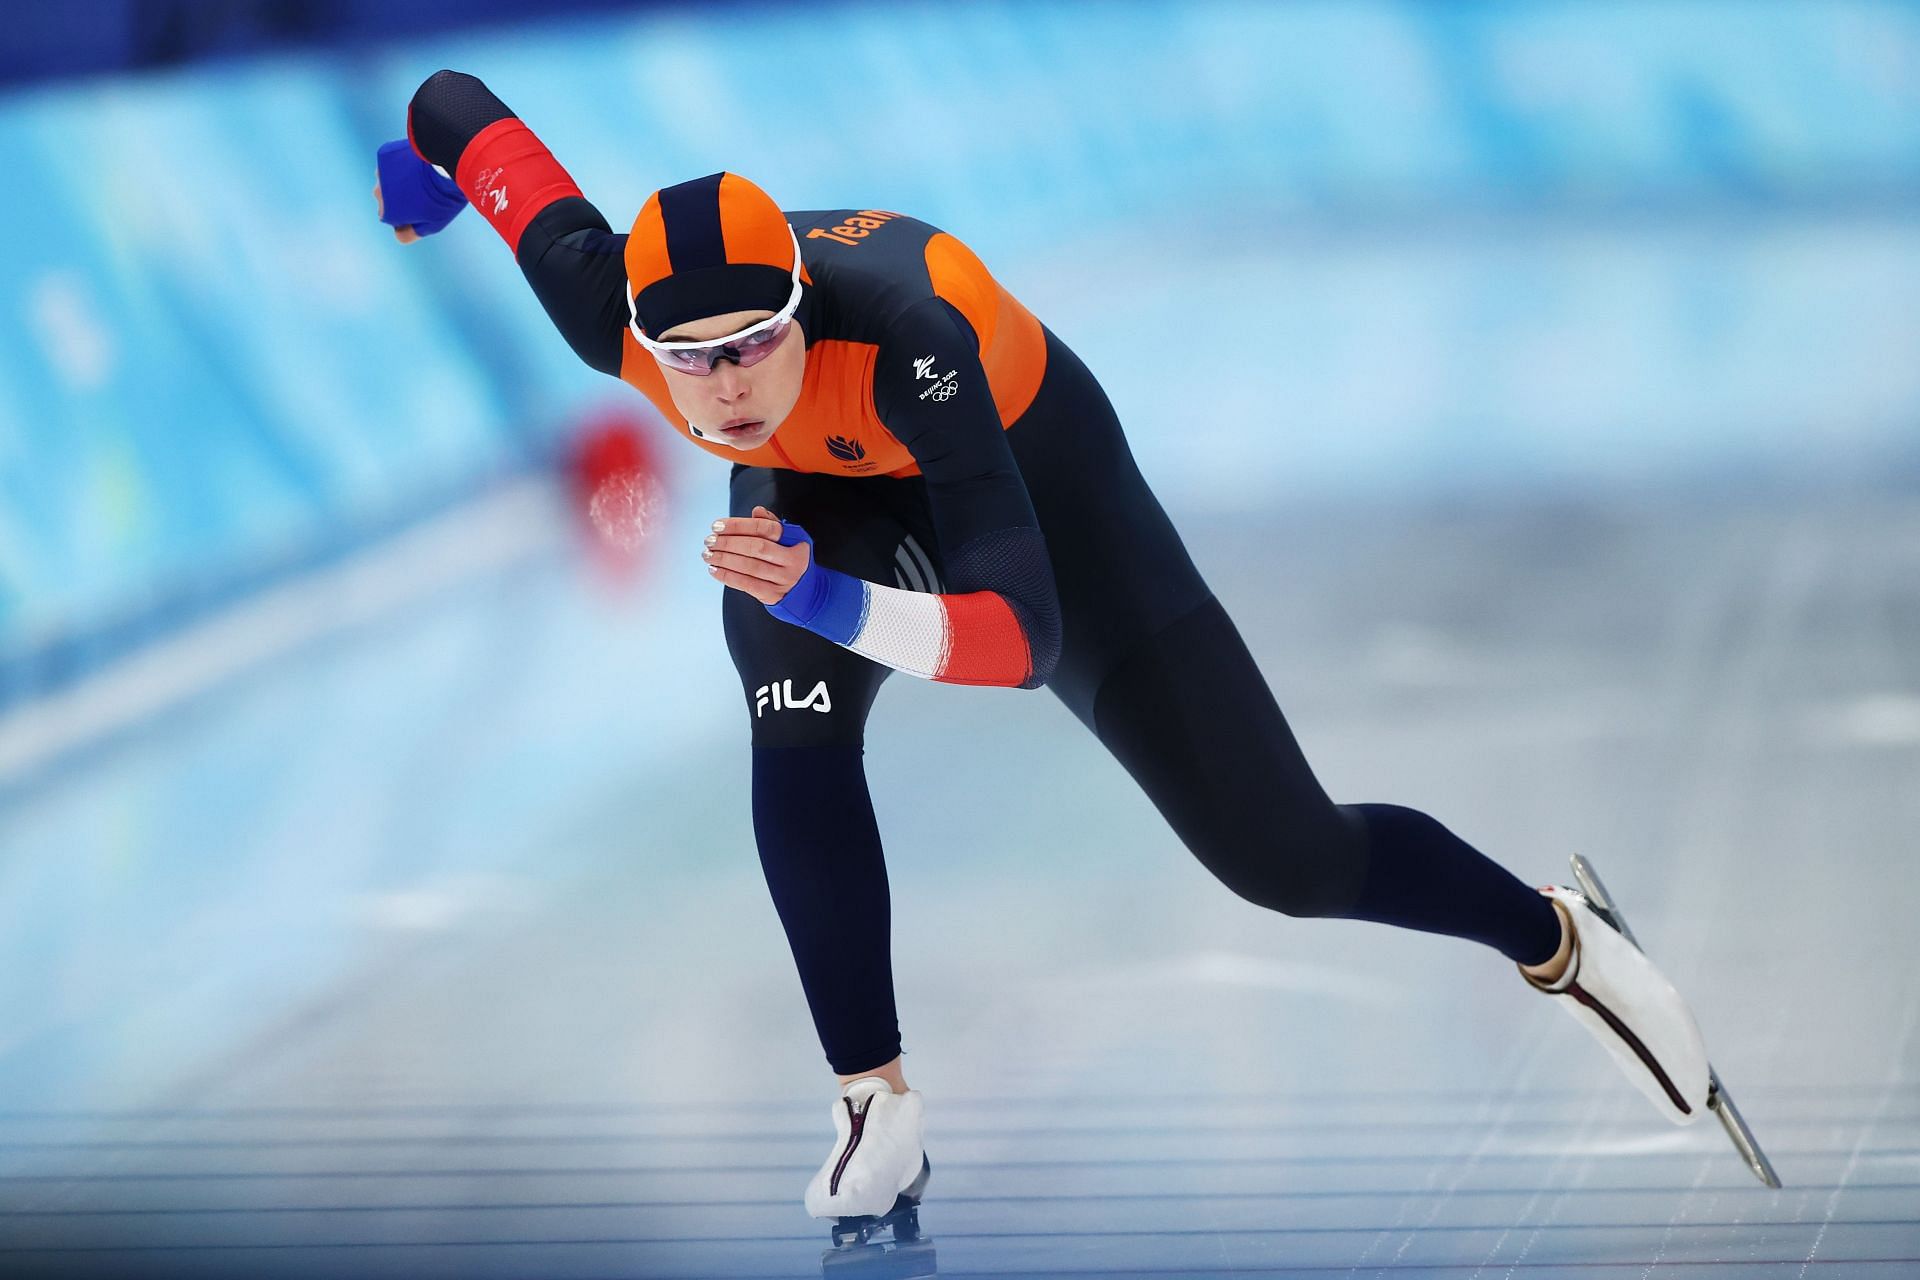 Jutta Leerdam at the Winter Olympics 2022, Day 13 [Image courtesy: Getty Images]